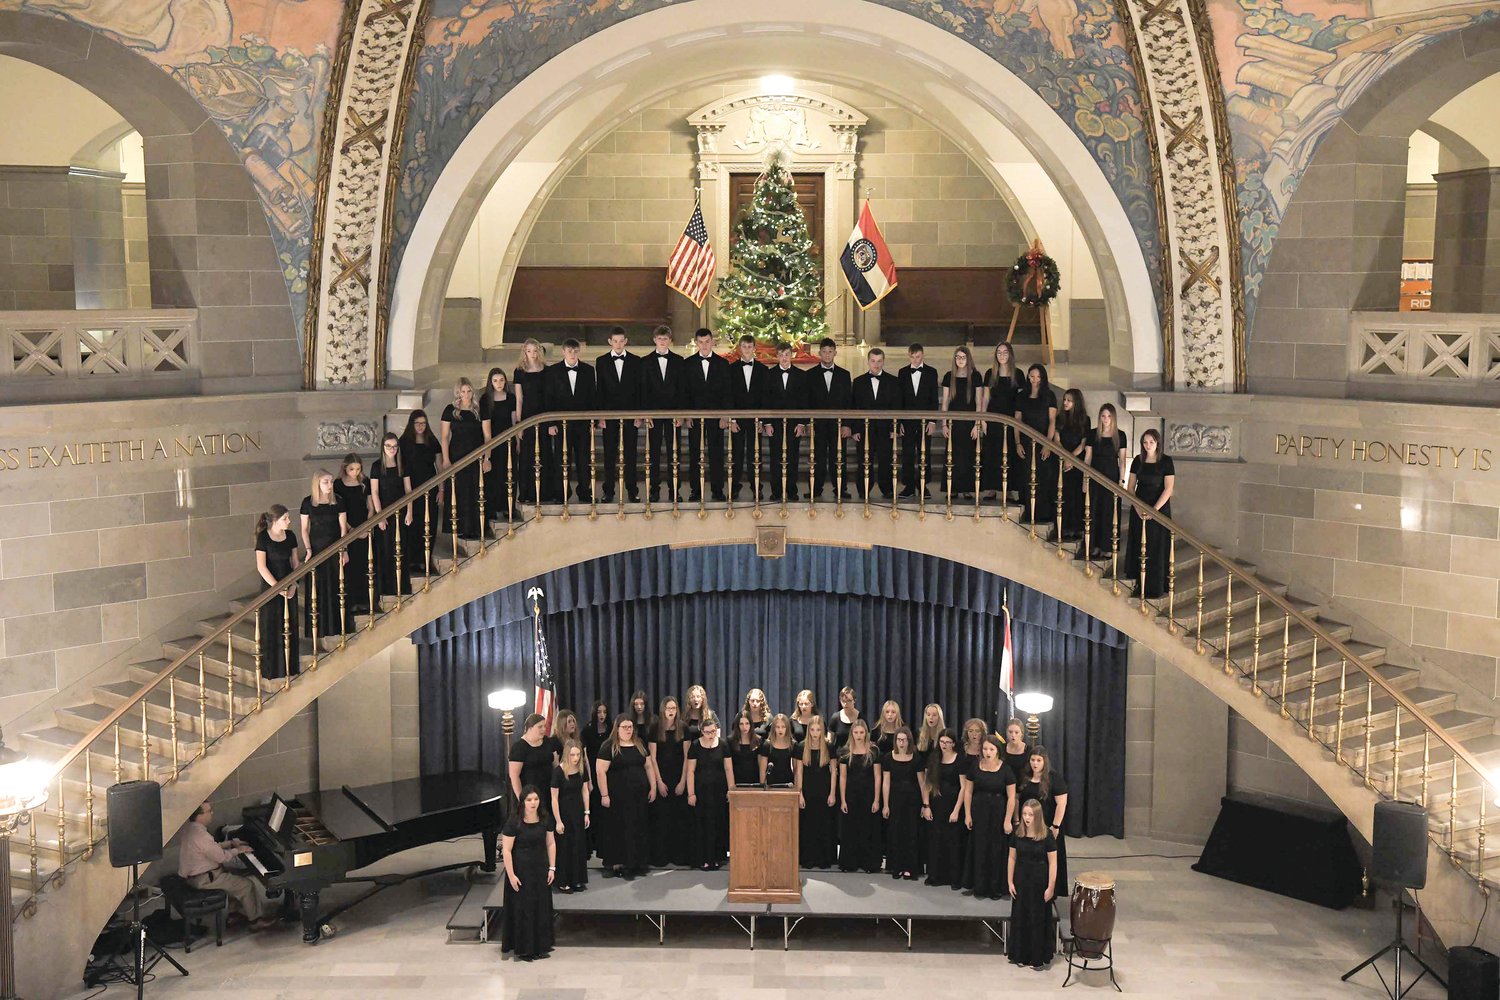 The Mountain Grove Choir performed inside the Missouri State Capitol in Jefferson City.